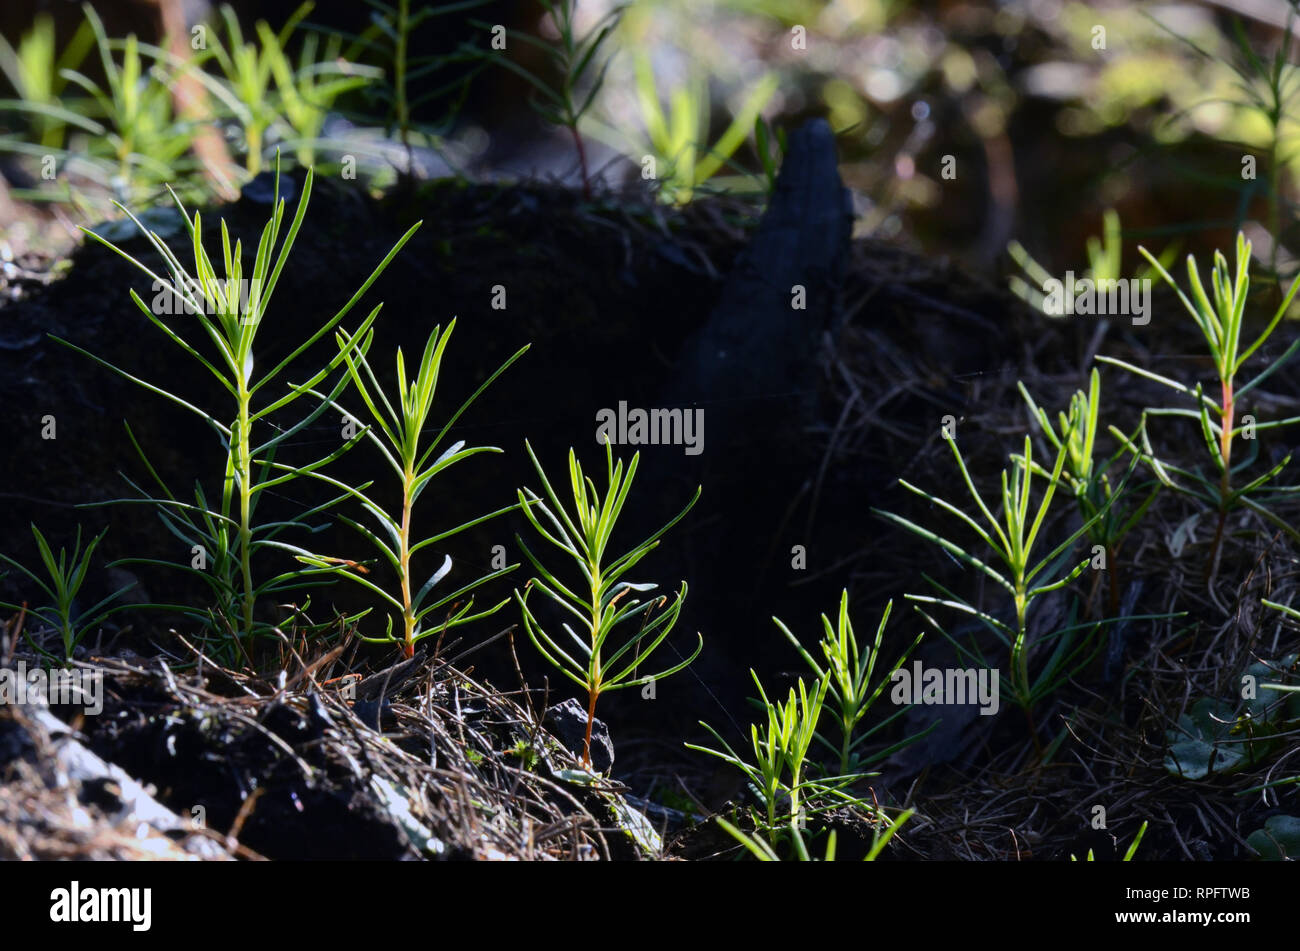 Western larch seedlings sprouting after prescribed fire following thinning in a conifer forest. Kootenai National Forest, MT (Photo by Randy Beacham) Stock Photo